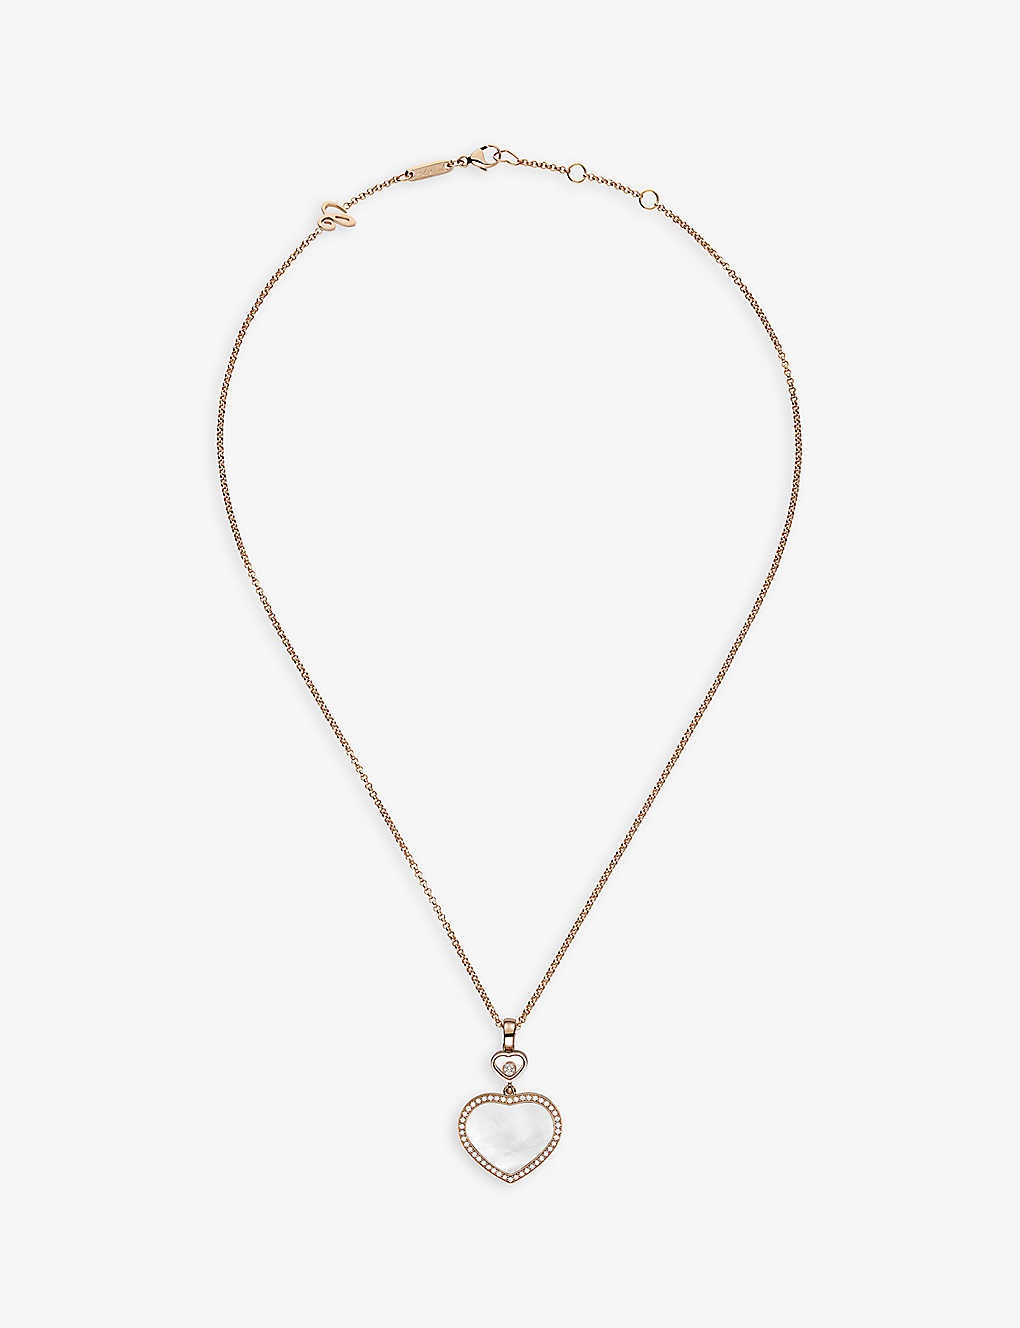 Happy Hearts 18ct rose-gold, 0.24ct diamond and mother-of-pearl necklace - 2